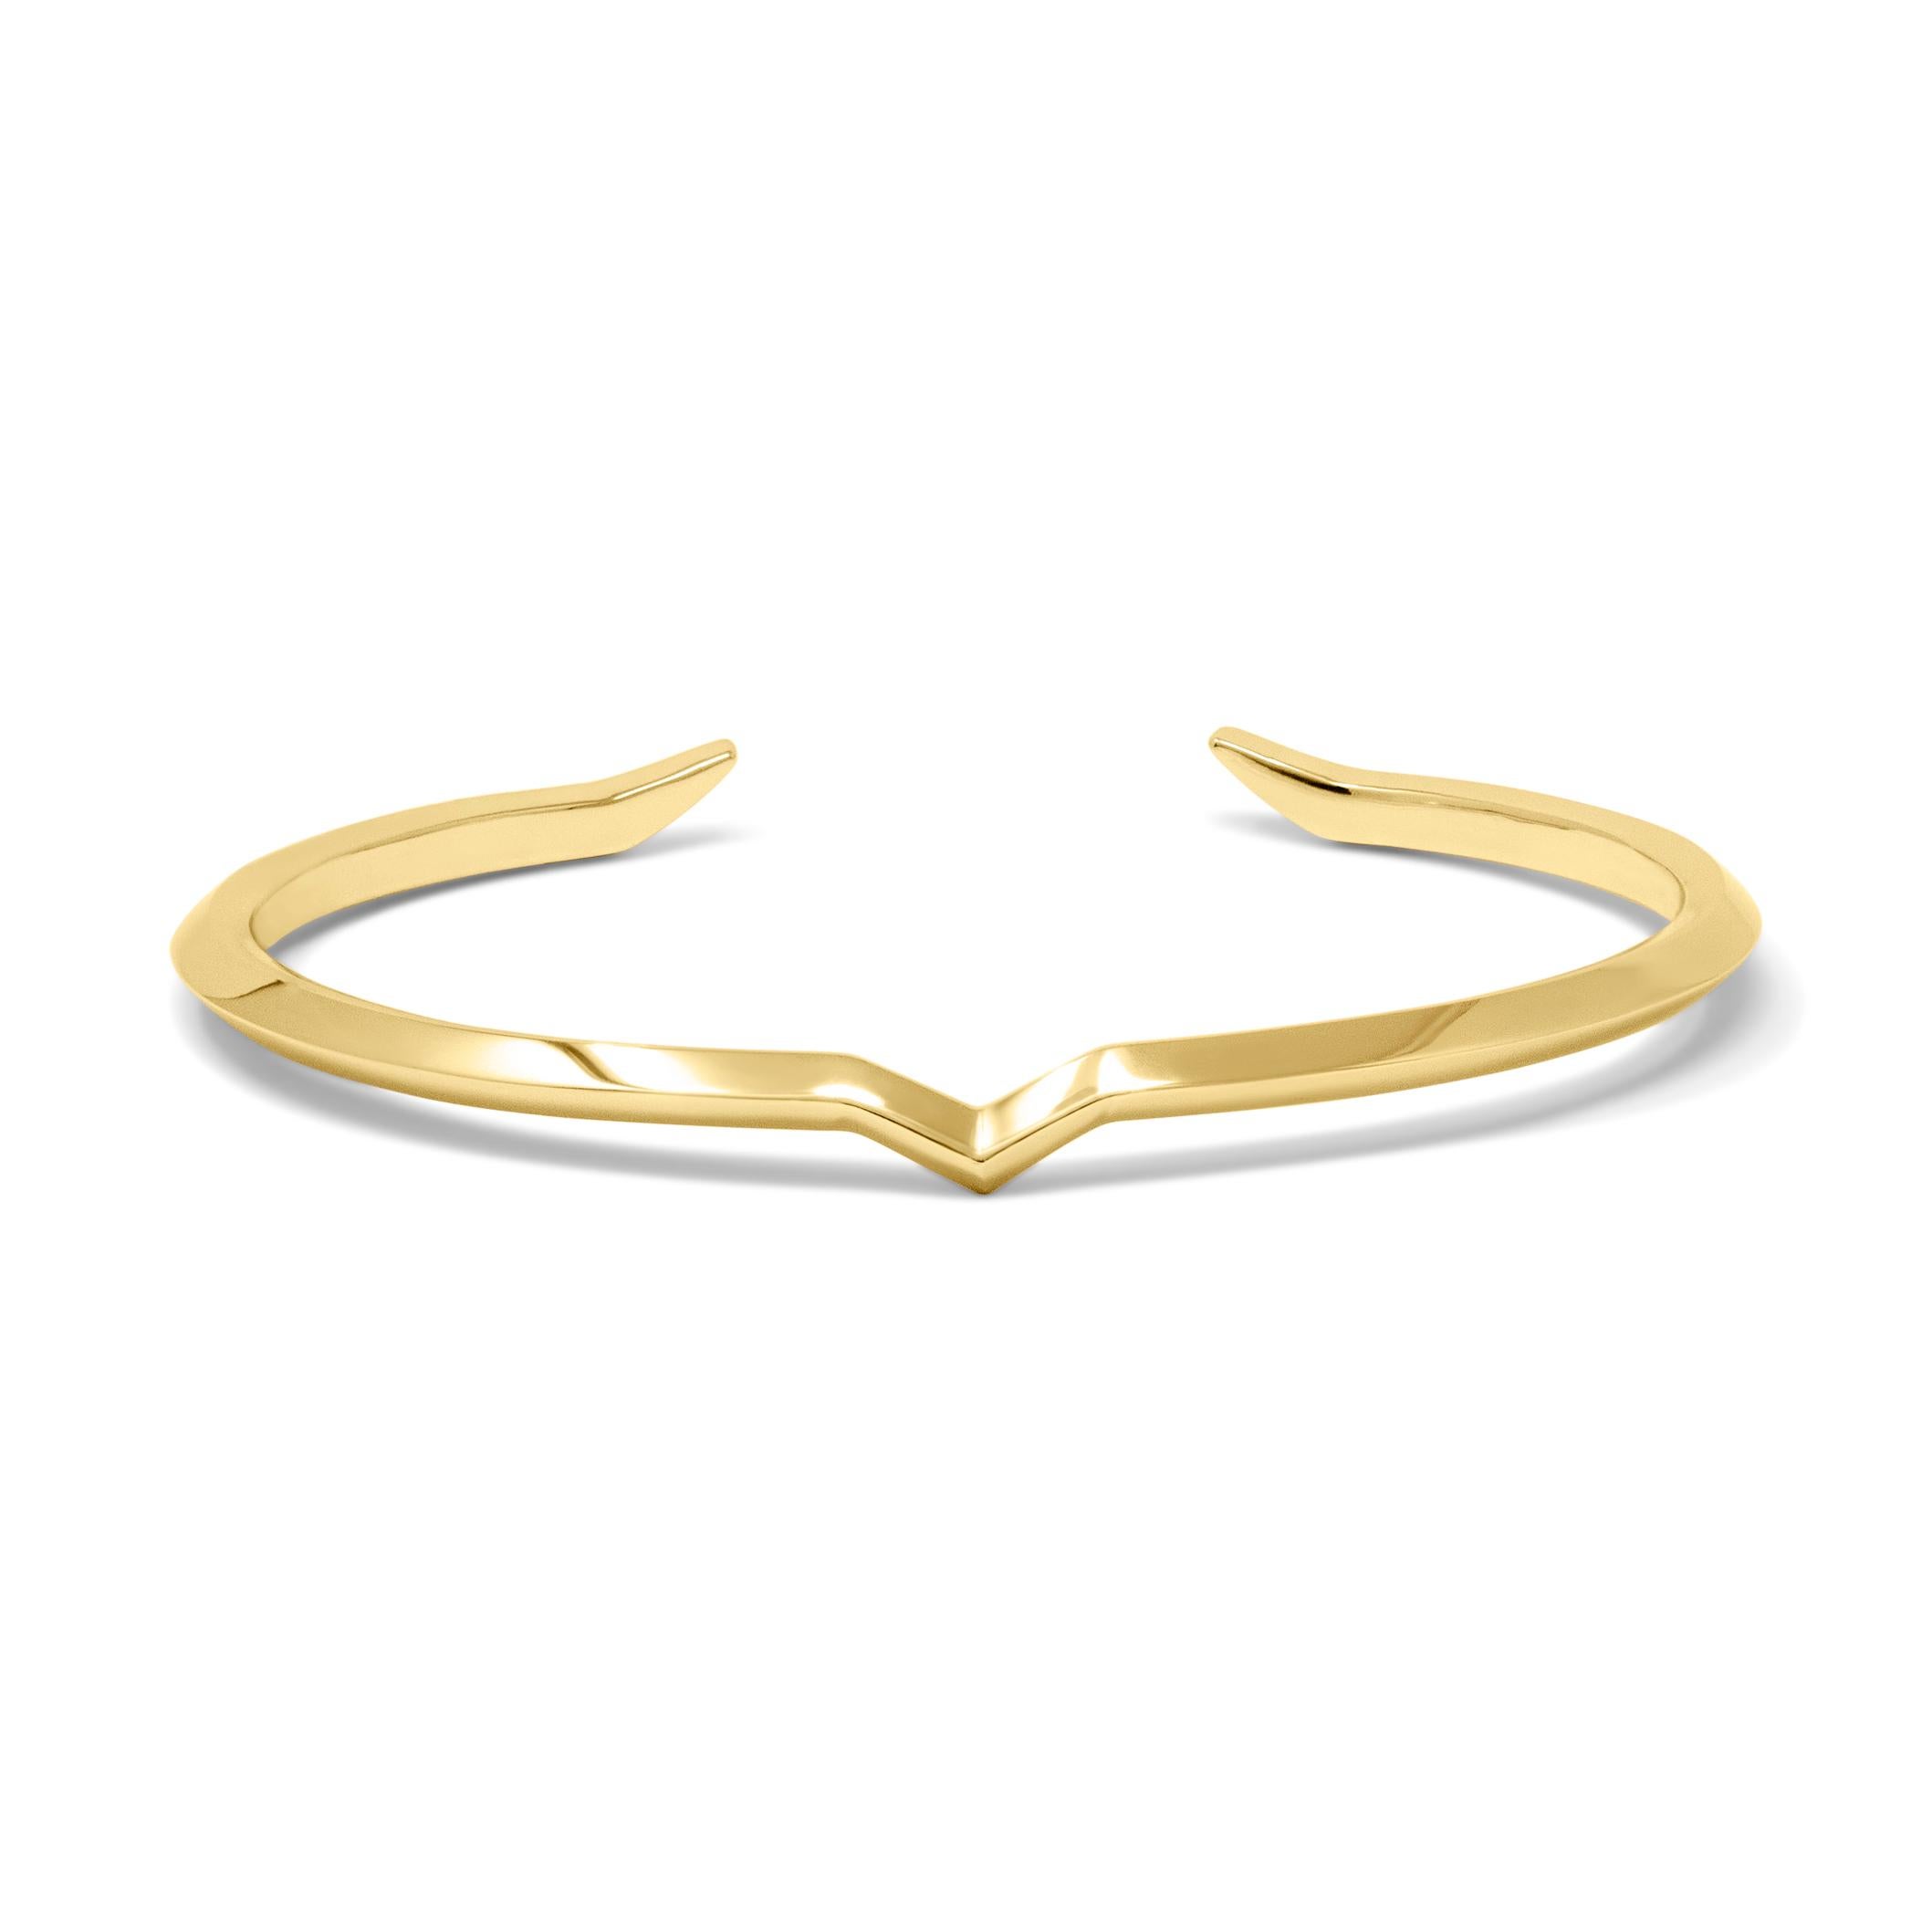 The Fang Bangle took inspiration from architecture, nature and Chinese calligraphy to create a minimalist yet metaphorical design. The shape and structure of the design took references from the antarctic animals' skeletons and a stroke from the